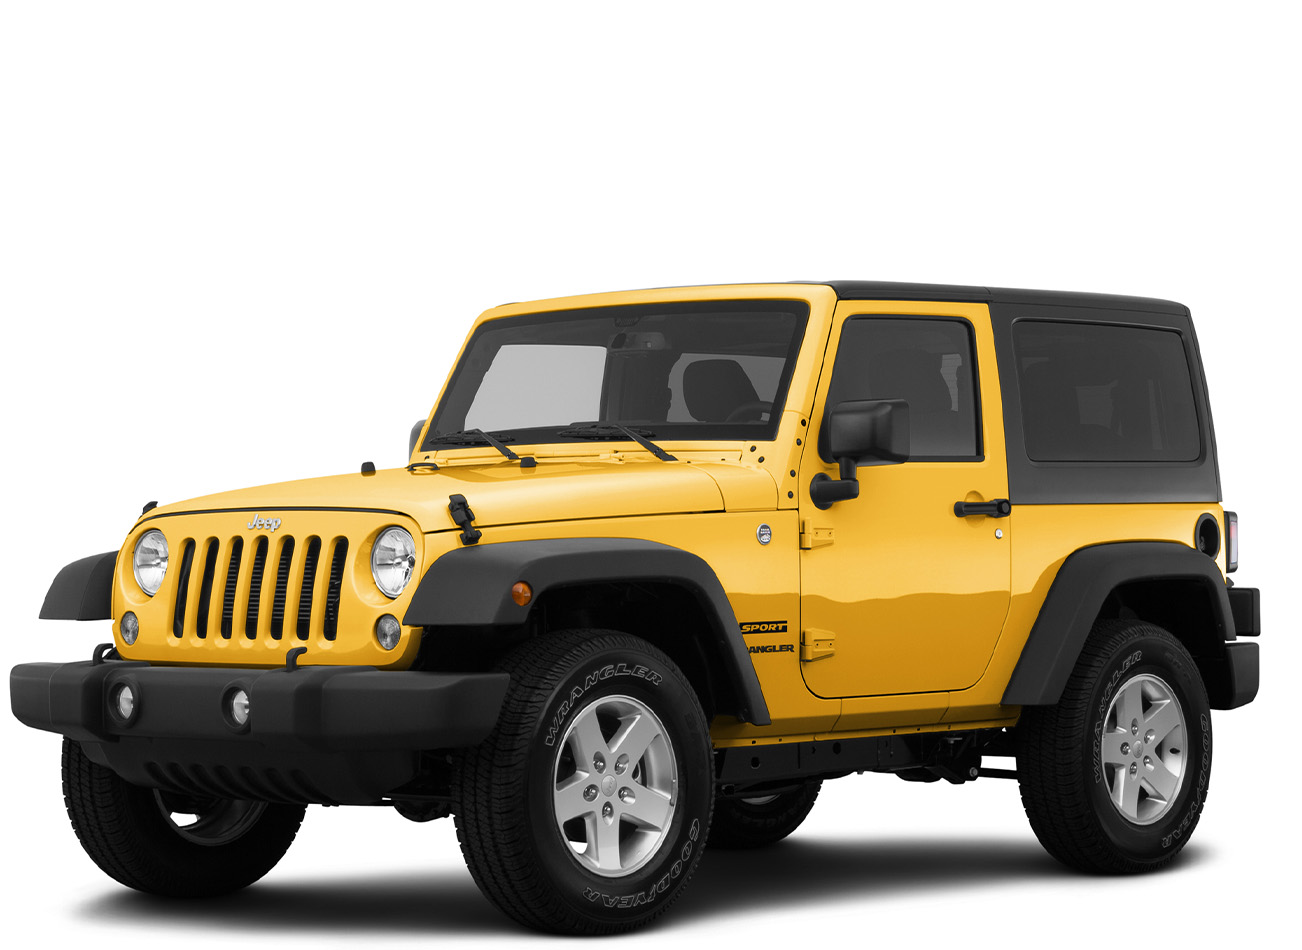 2015 Jeep Wrangler Research, photos, specs, and expertise